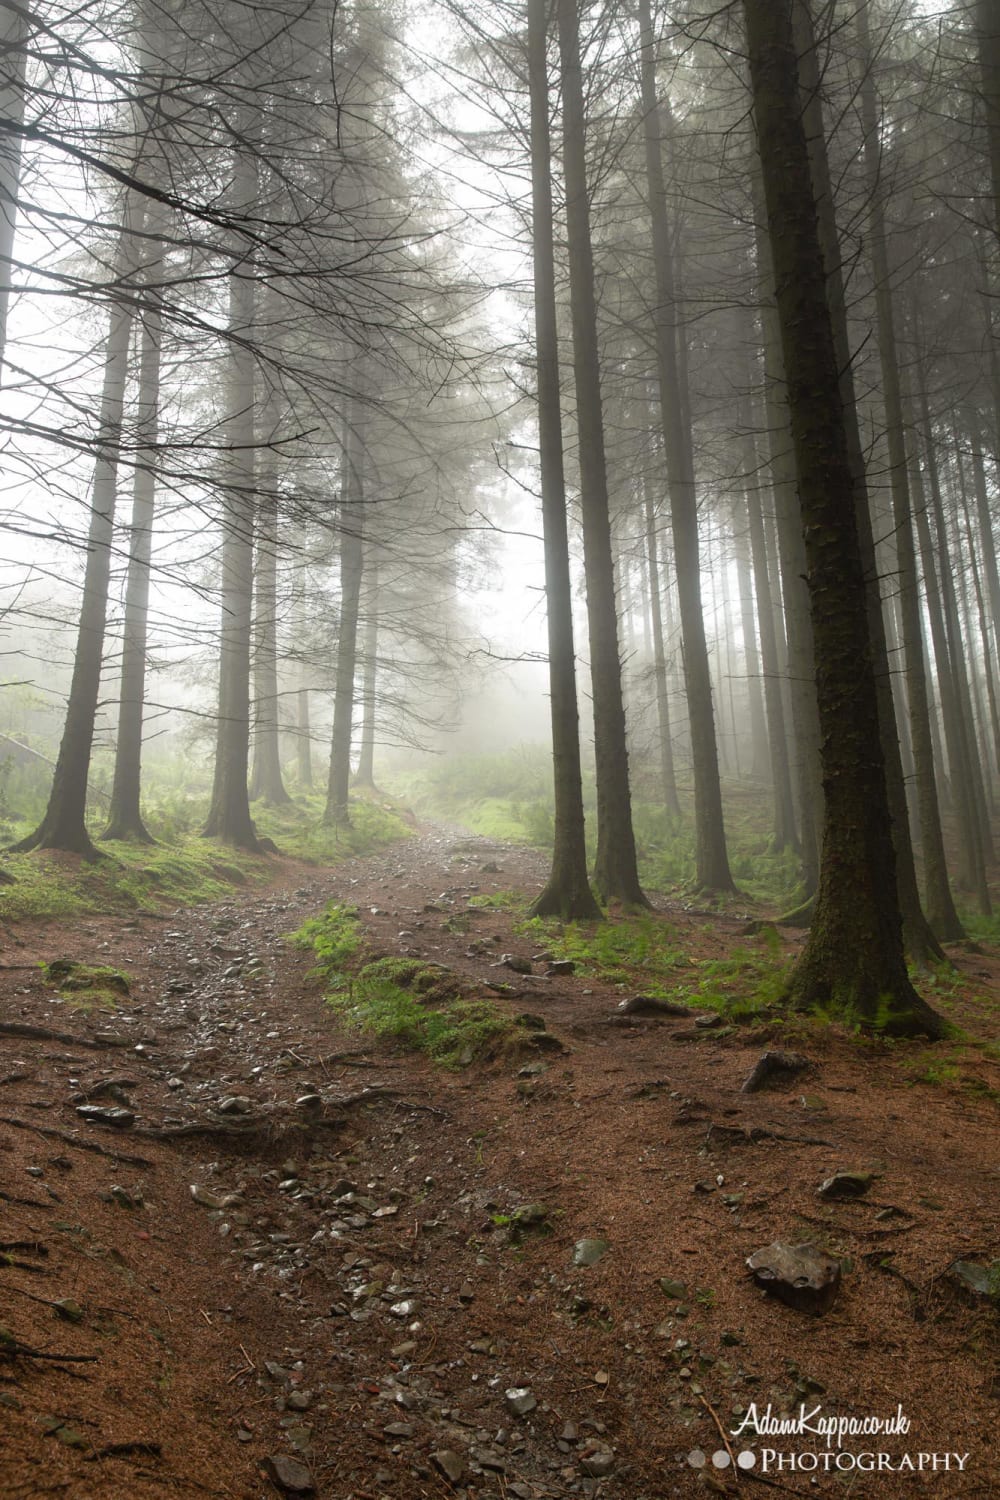 Walking through a mist-filled forest in the Lake District